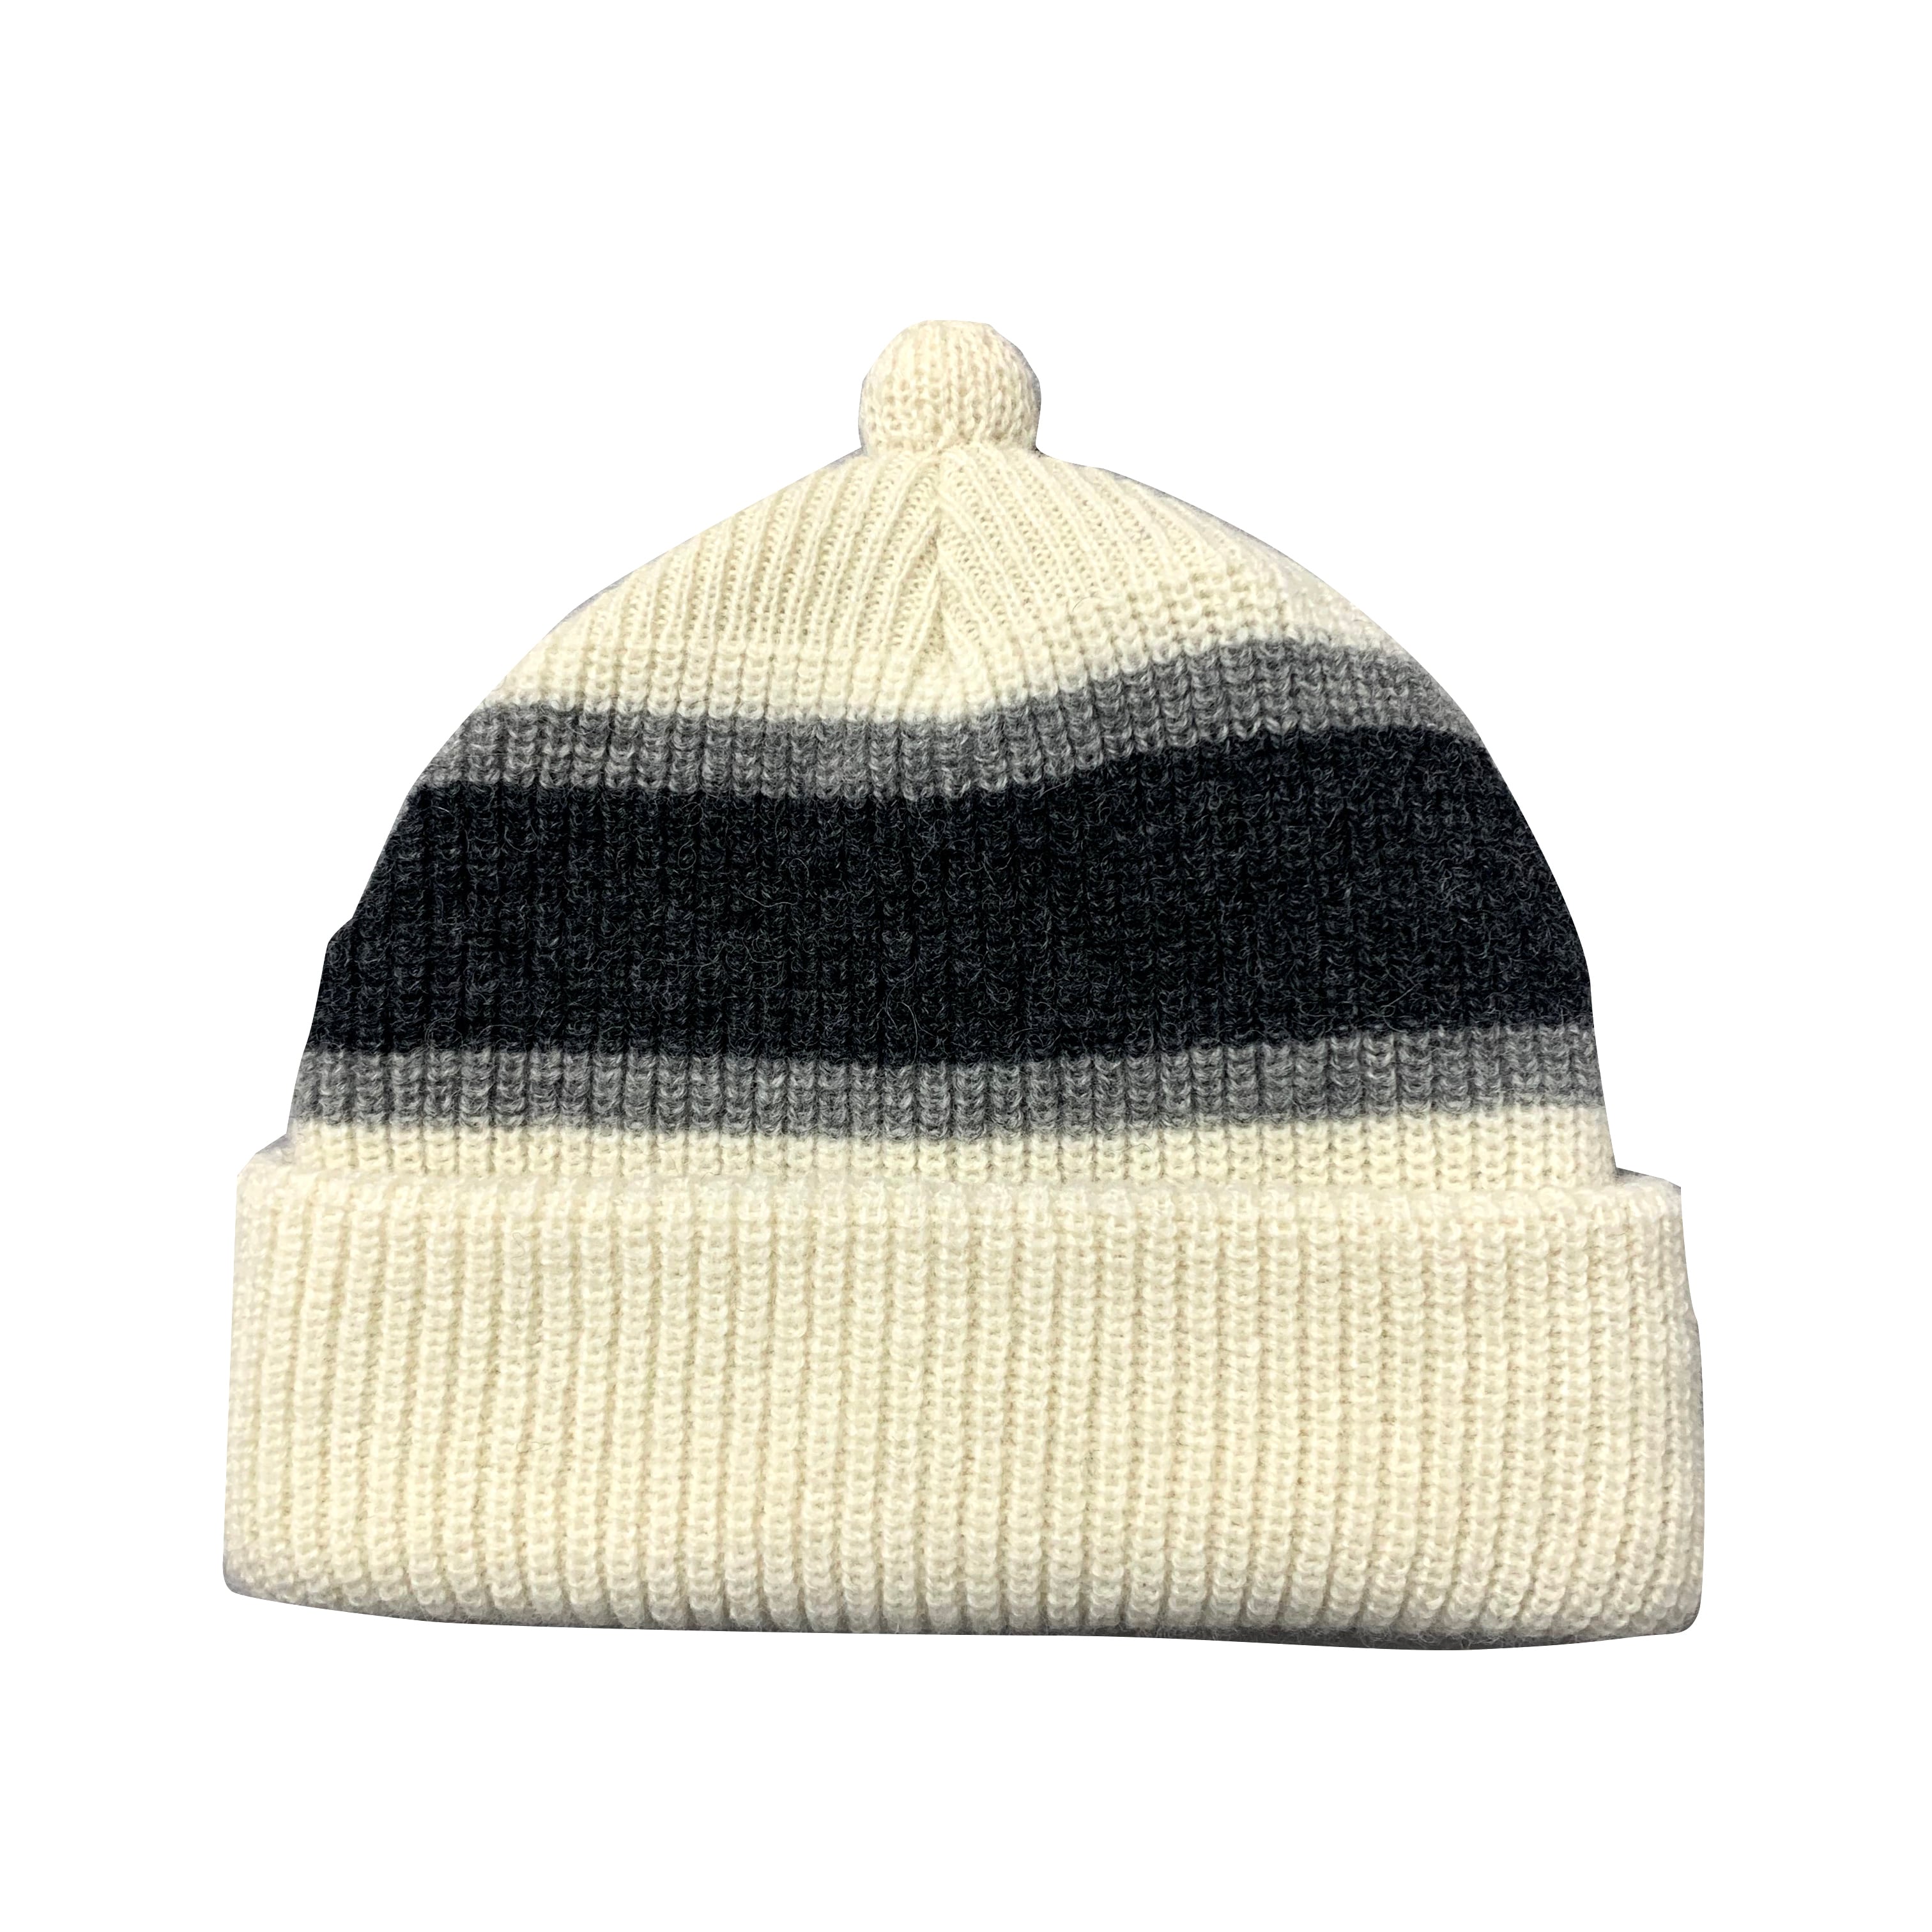 NOROLL / GERMINATE BEANIE -WHITE- | THE NEWAGE CLUB powered by BASE